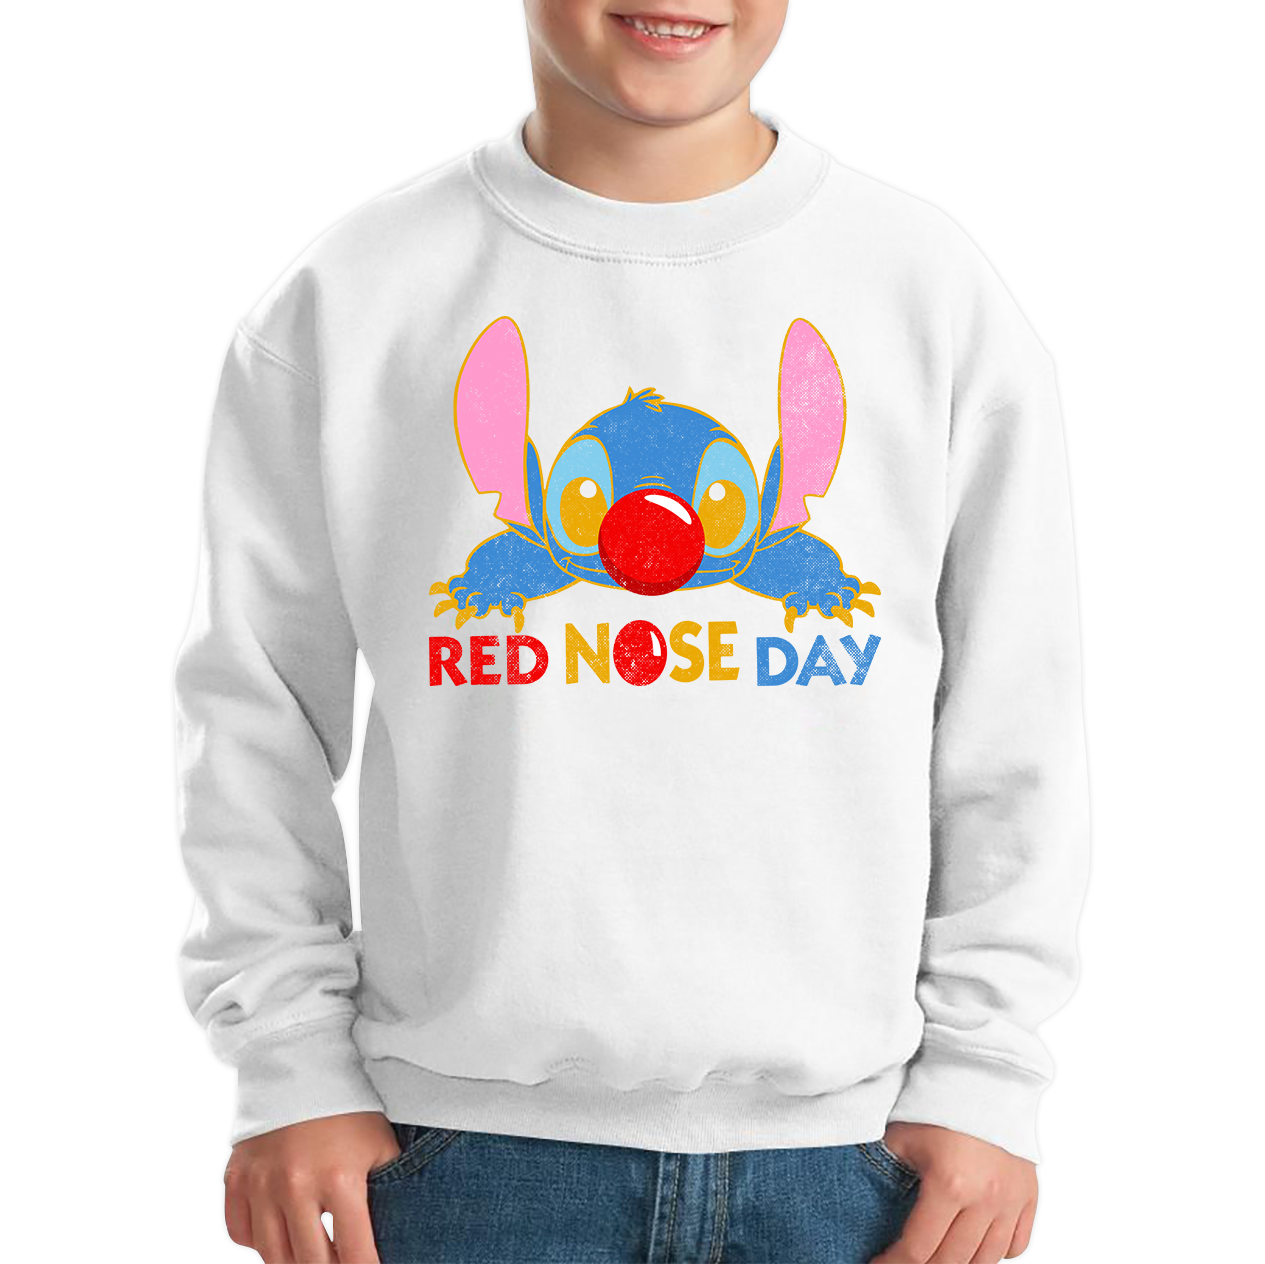 Disney Stitch Red Nose Day Kids Jumper Top Ohana Red nose Day Funny Kids Sweatshirt. 50% Goes To Charity